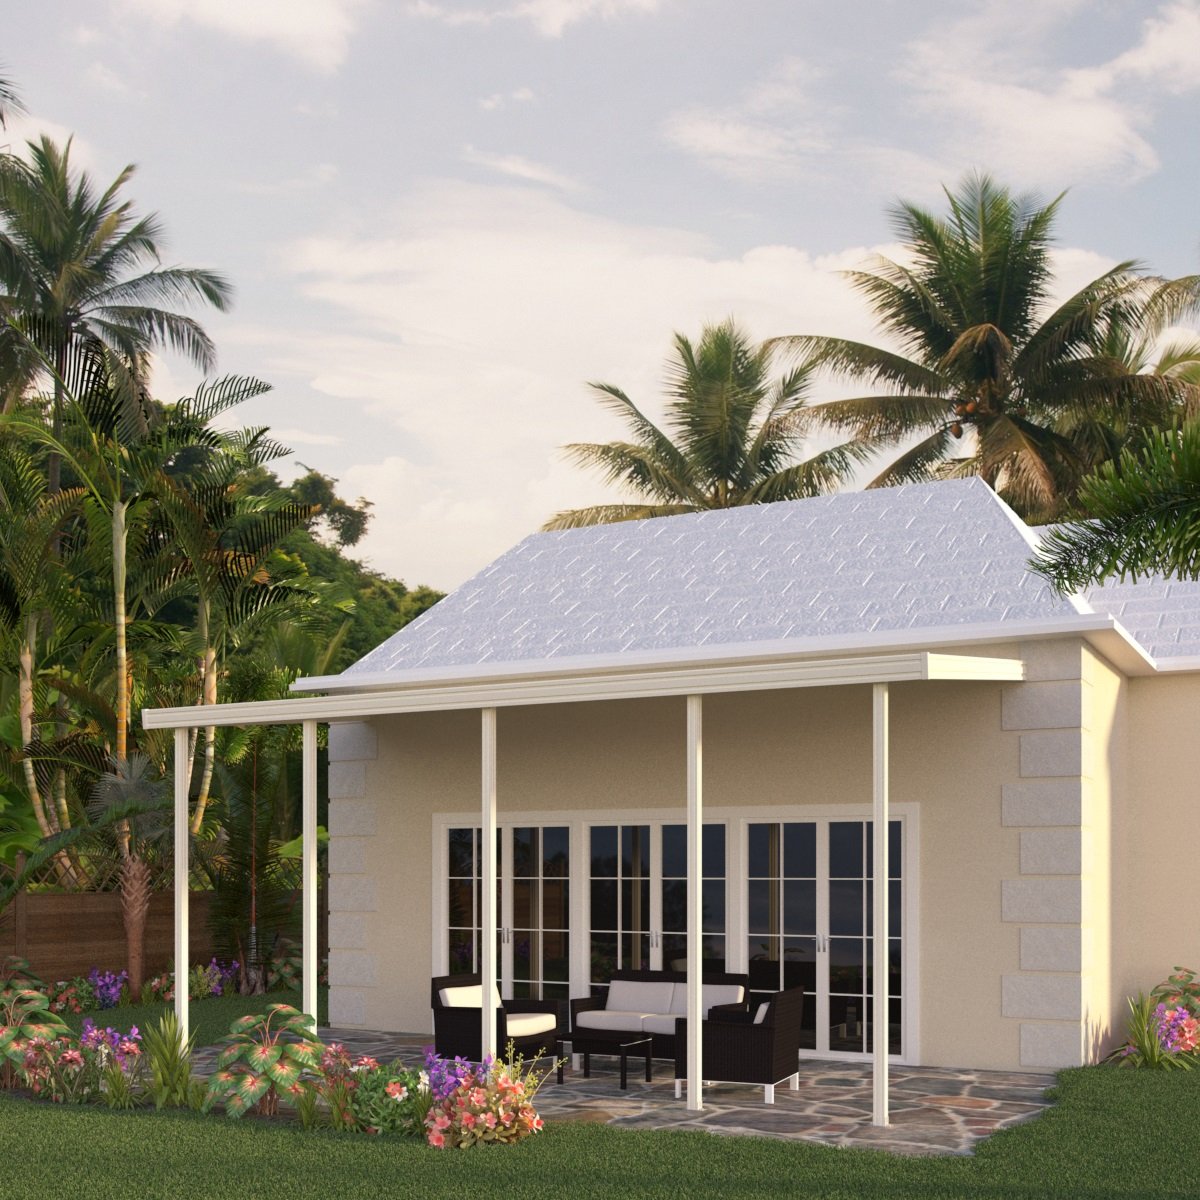 10 ft. Deep x 28 ft. Wide Ivory Attached Aluminum Patio Cover -4 Posts - (20lb Low/Medium Snow Area)